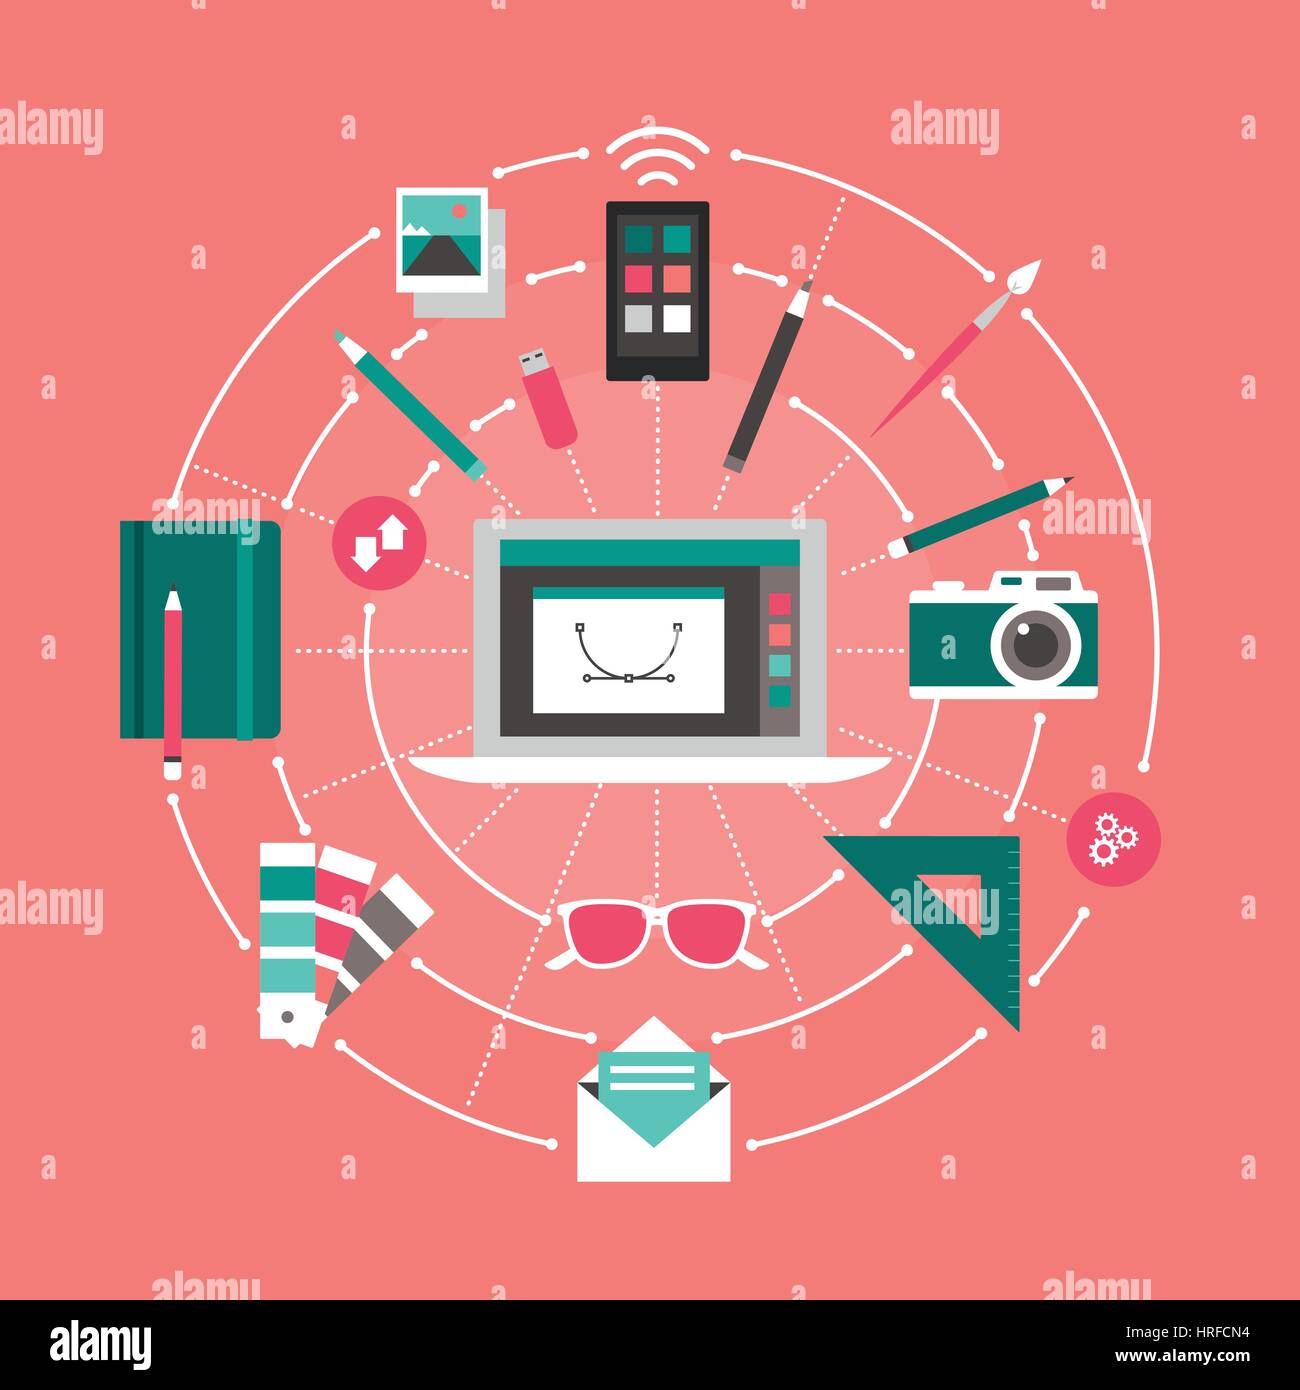 Design, creativity and technology banner: laptop, graphic designer work tools and icons connecting together Stock Vector